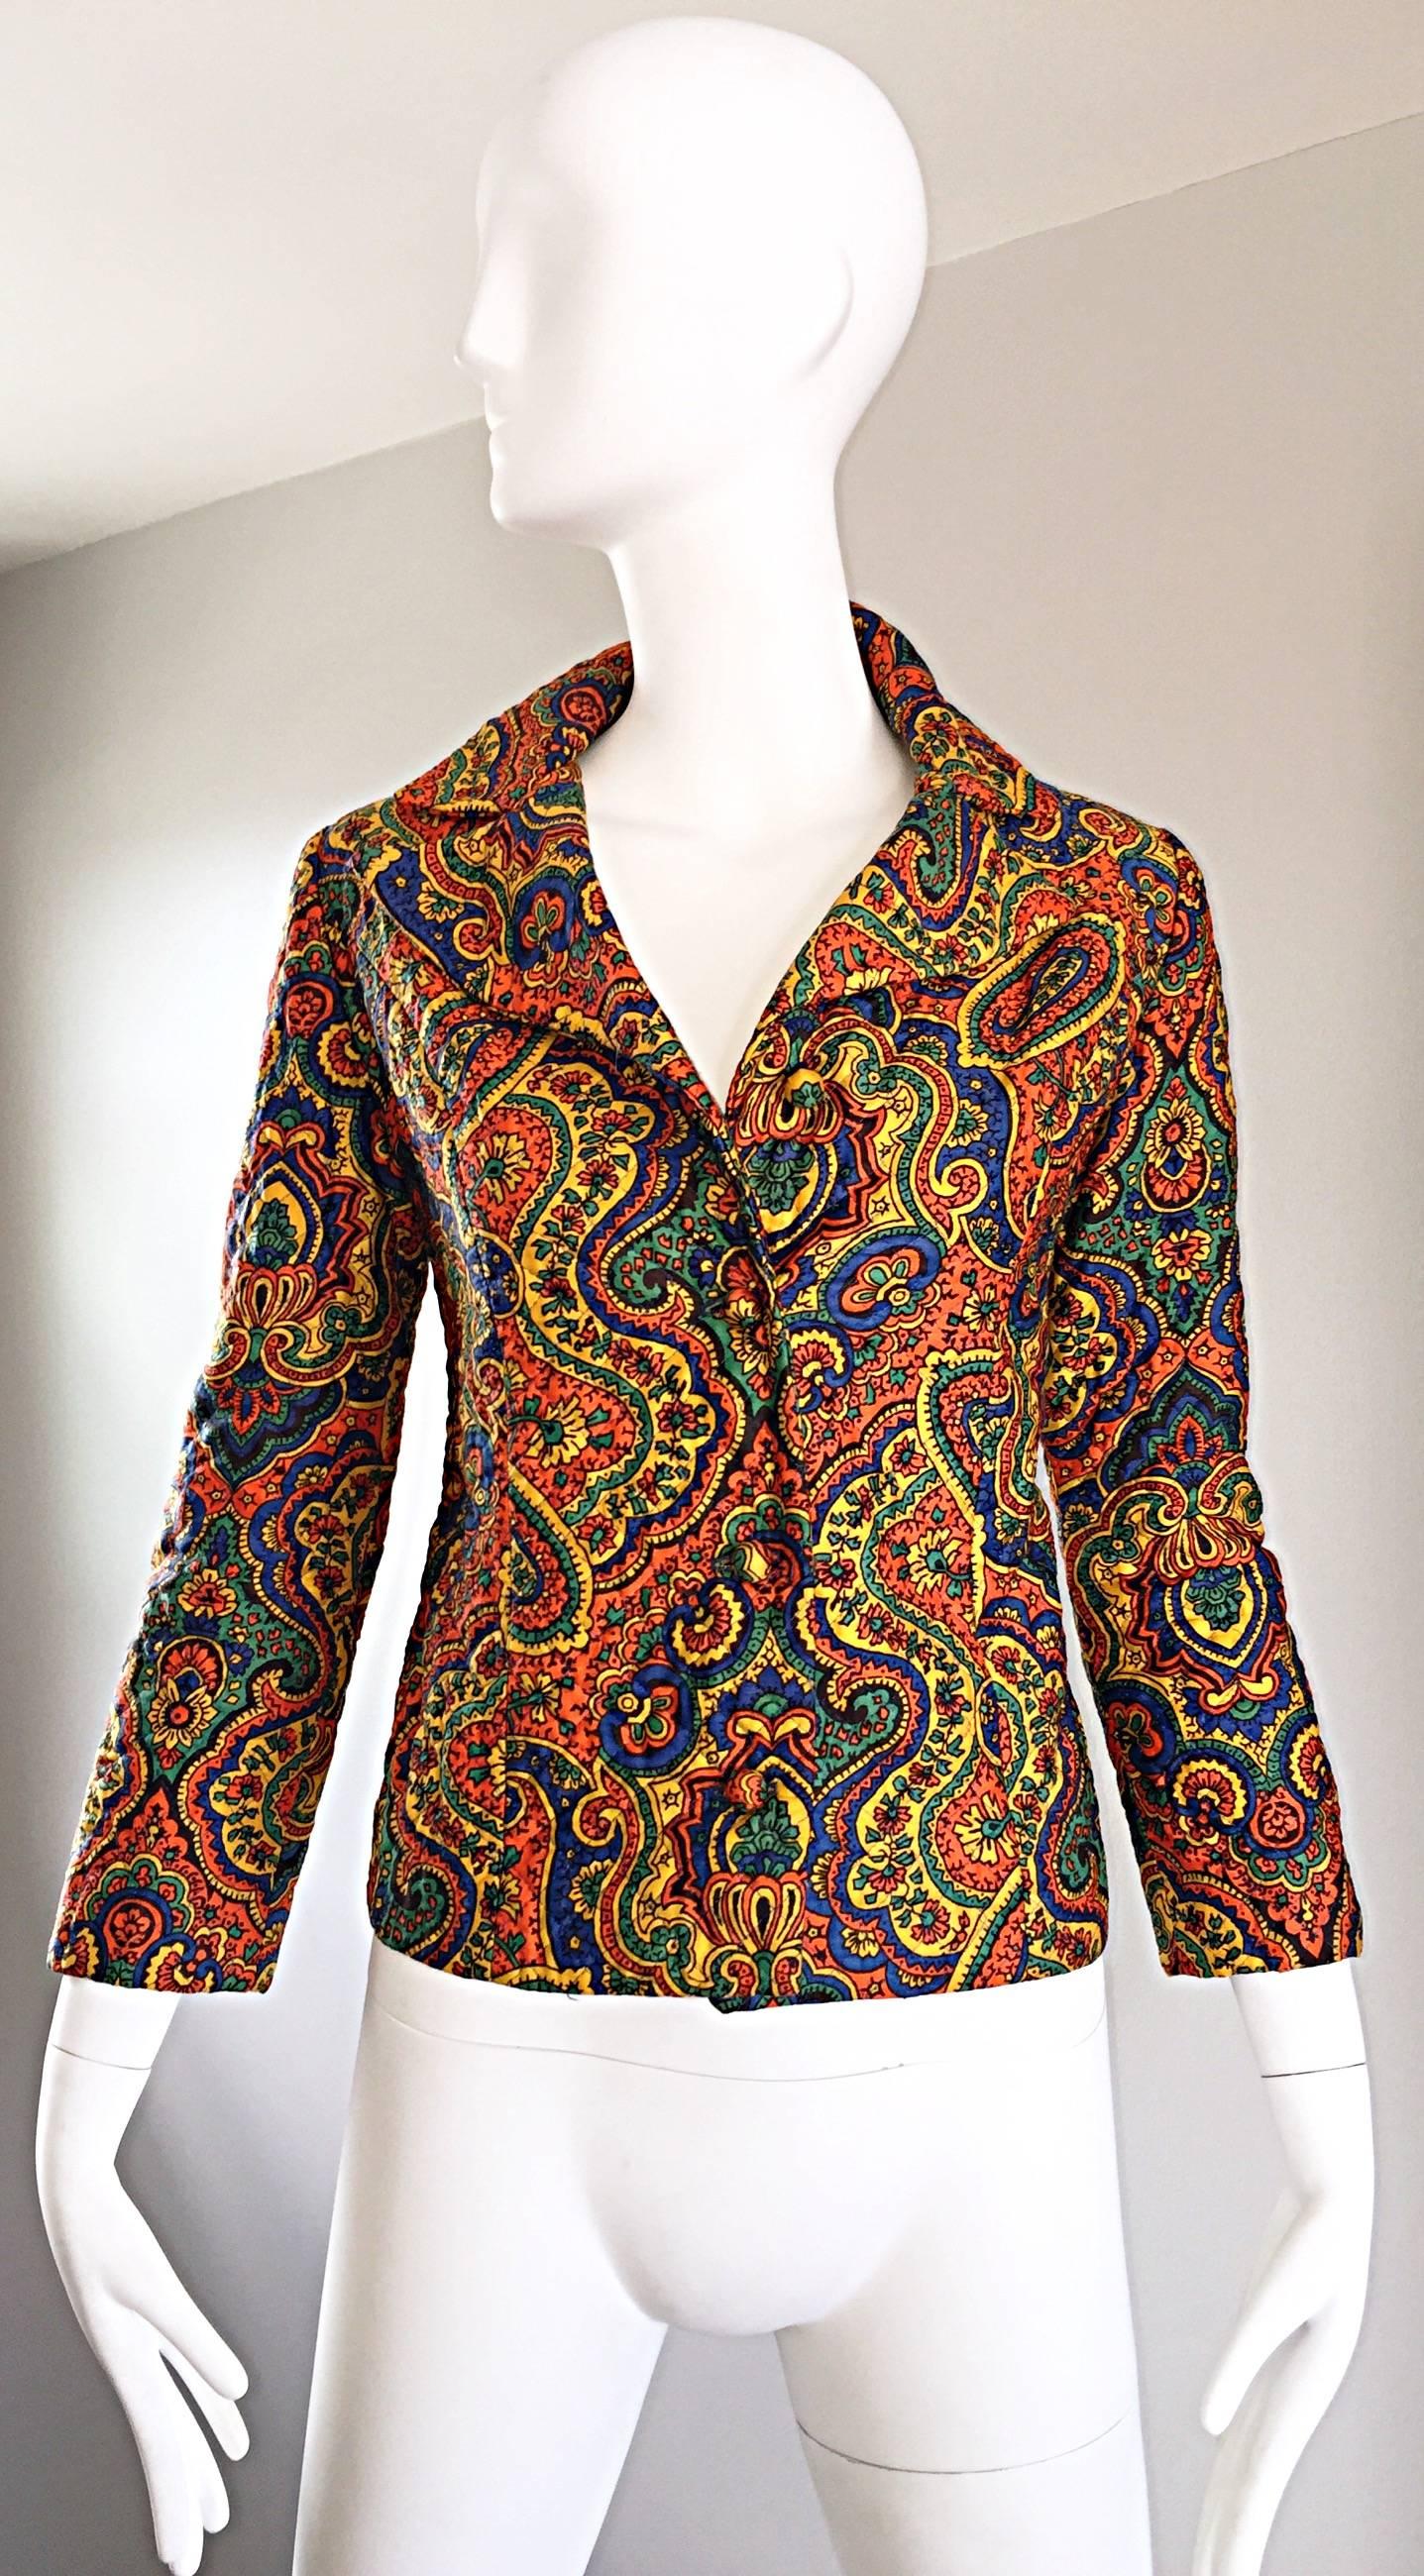 Women's Rare Vintage Wippette 1960s Mod Paisley Cotton Quilted Psychedelic Blazer Jacket